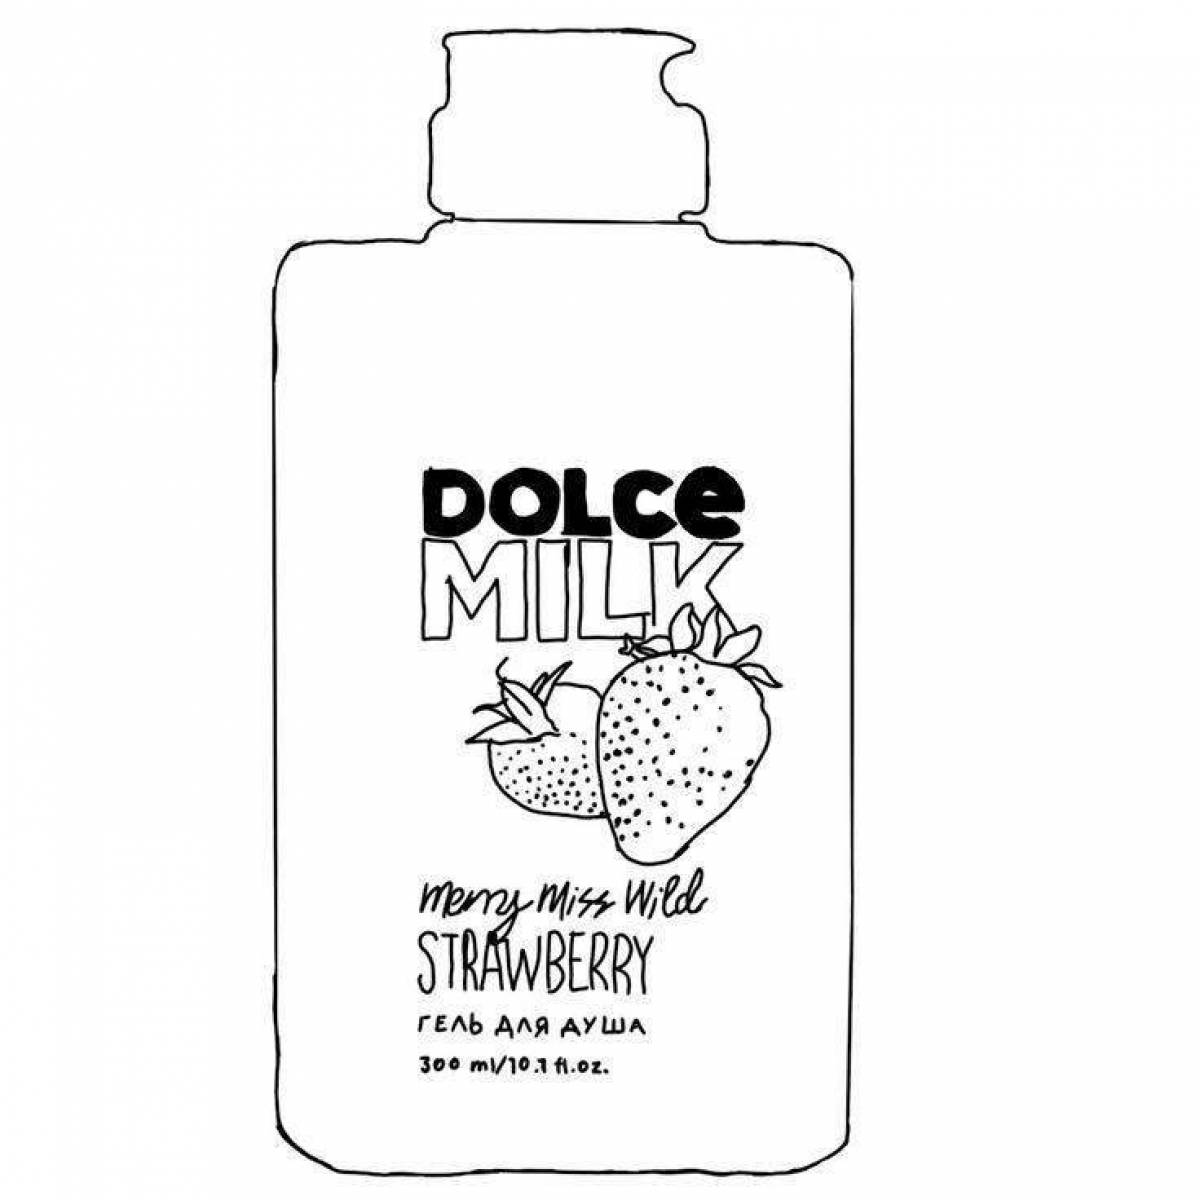 Awesome dolce milk antiseptic coloring book